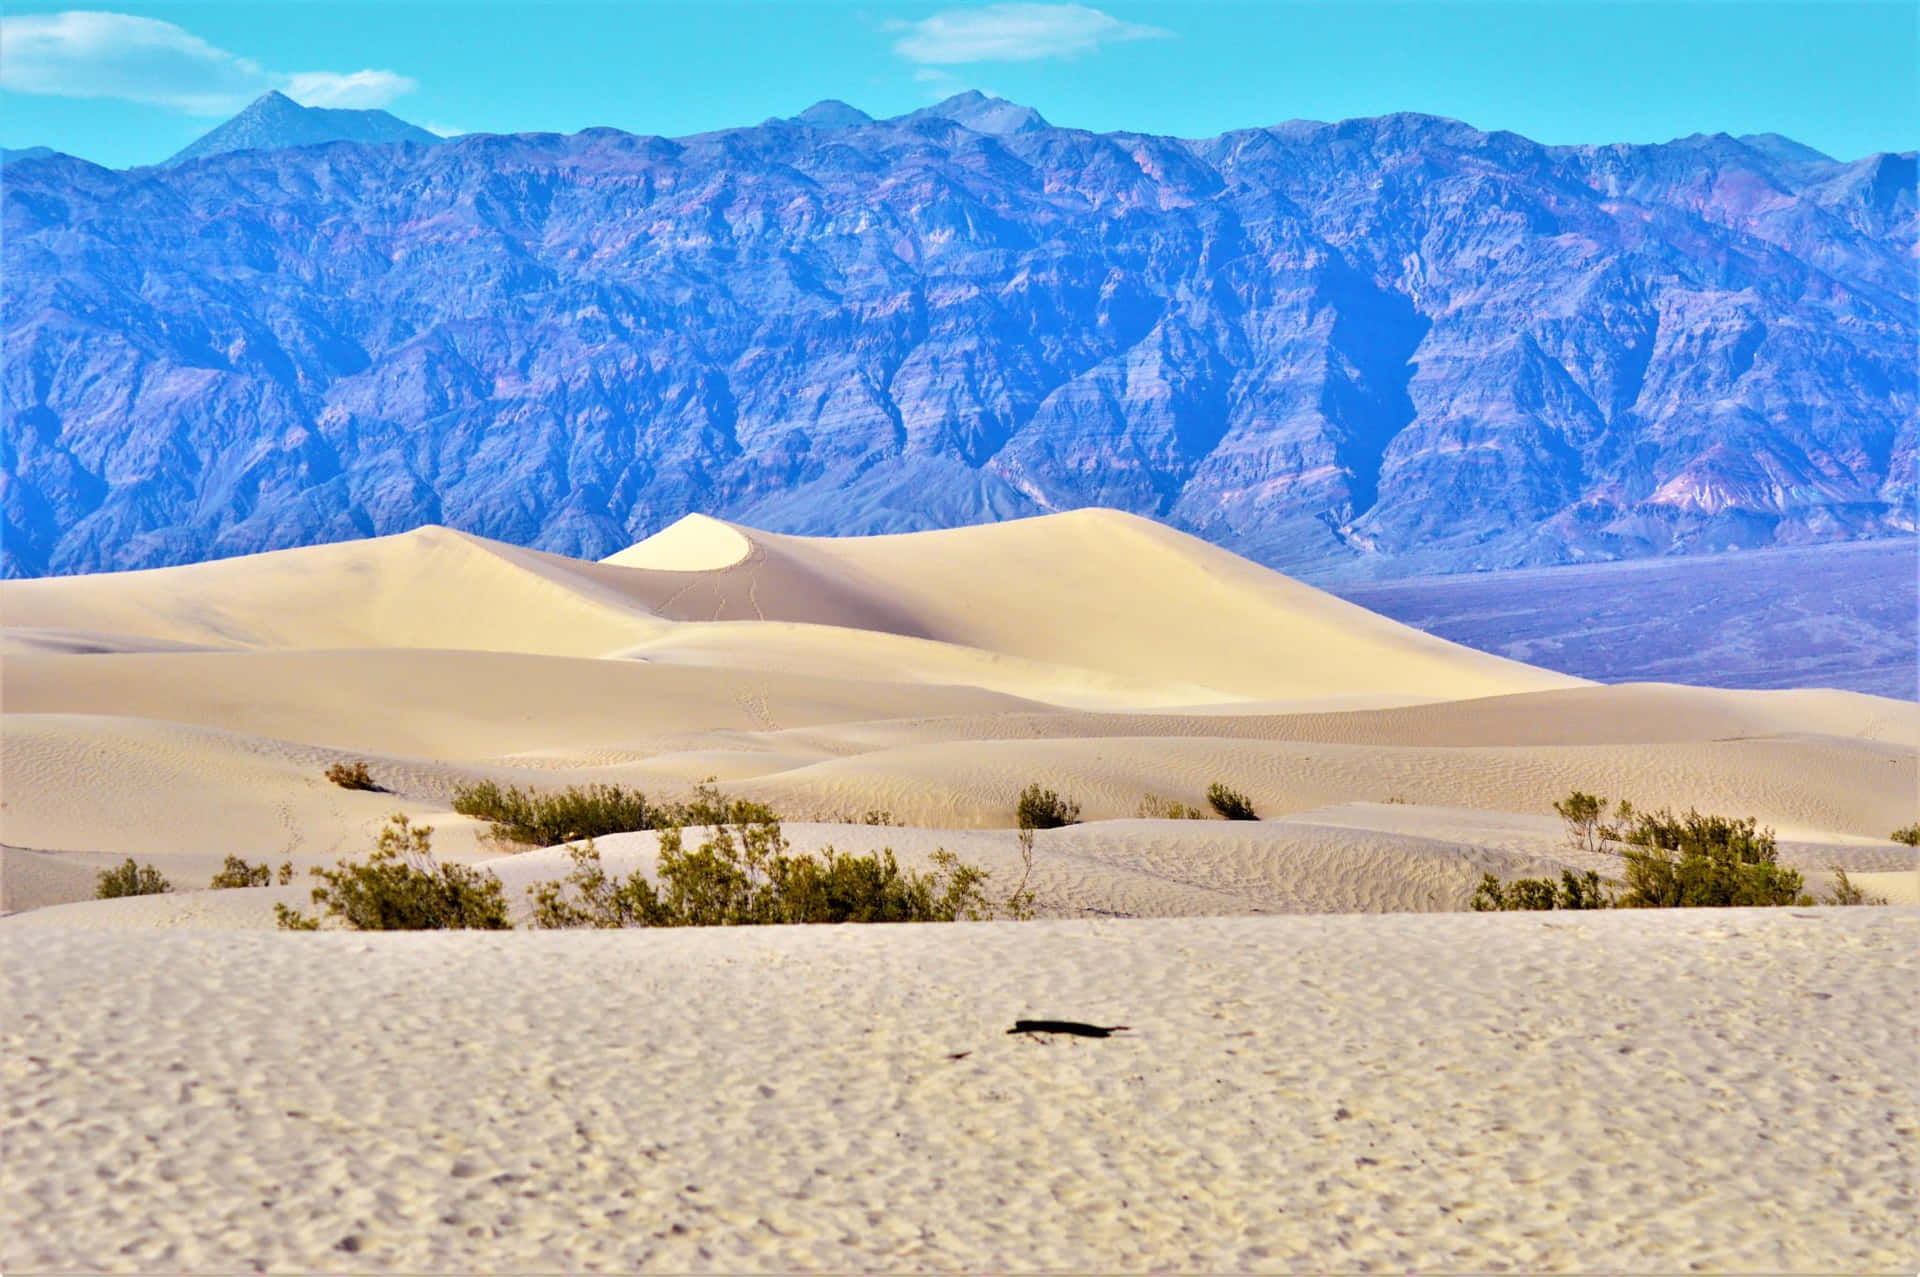 "The beauty and infinite potential of the vast desert known as the Dune"